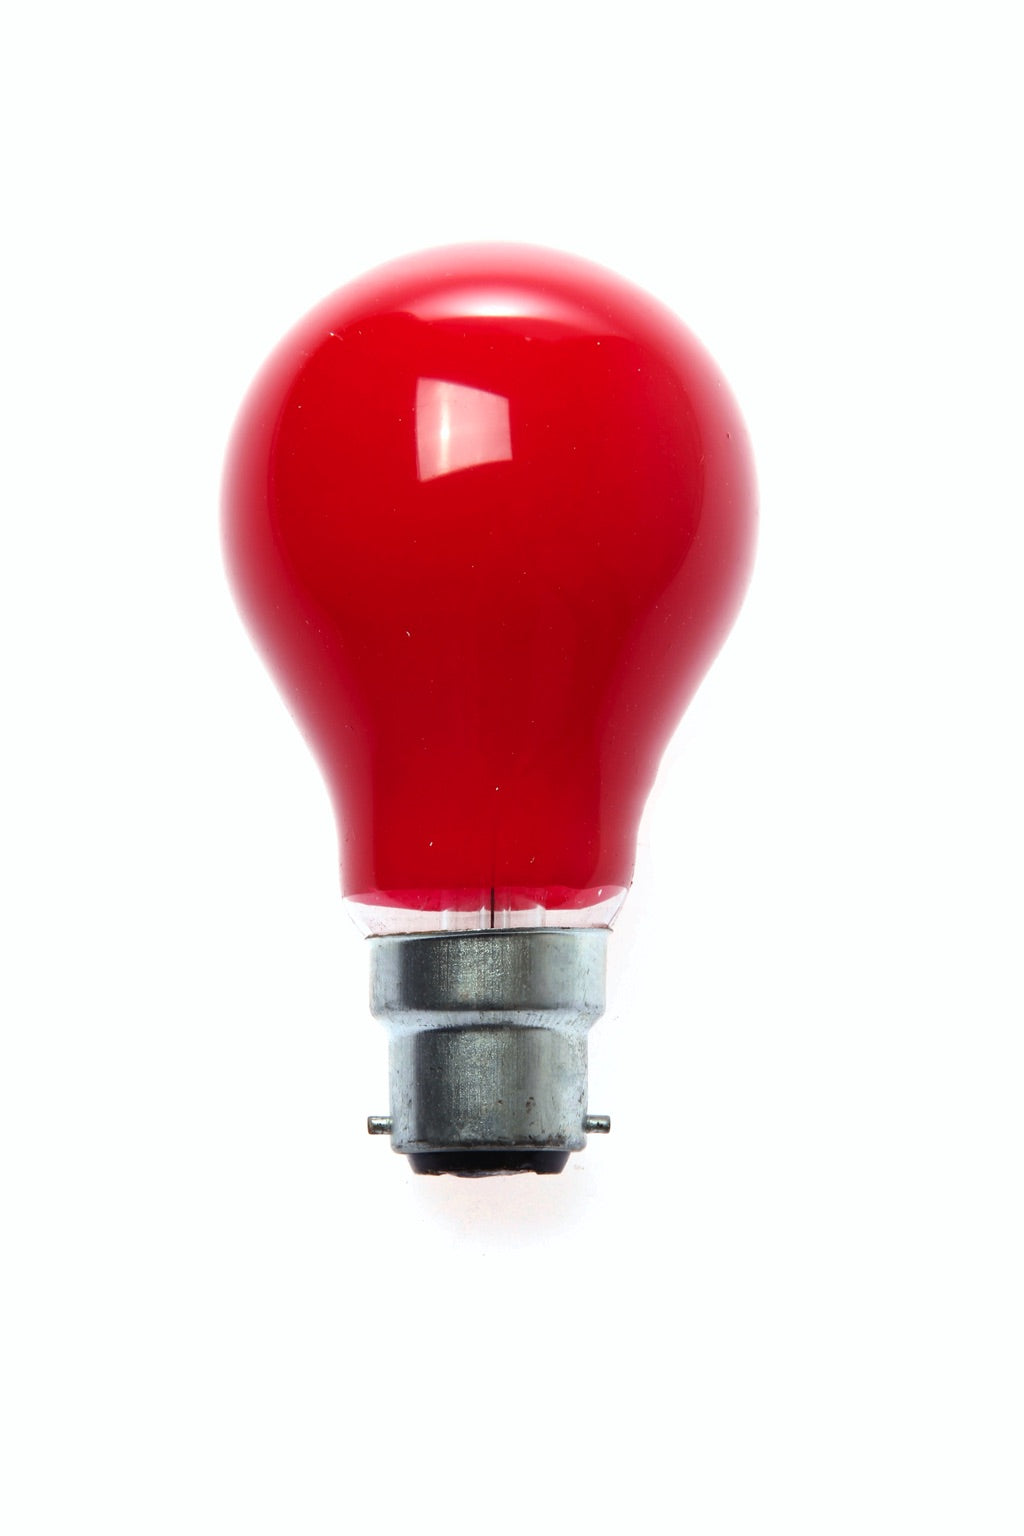 790333-LAMP COLORED B-22, 110-120V 60W RED